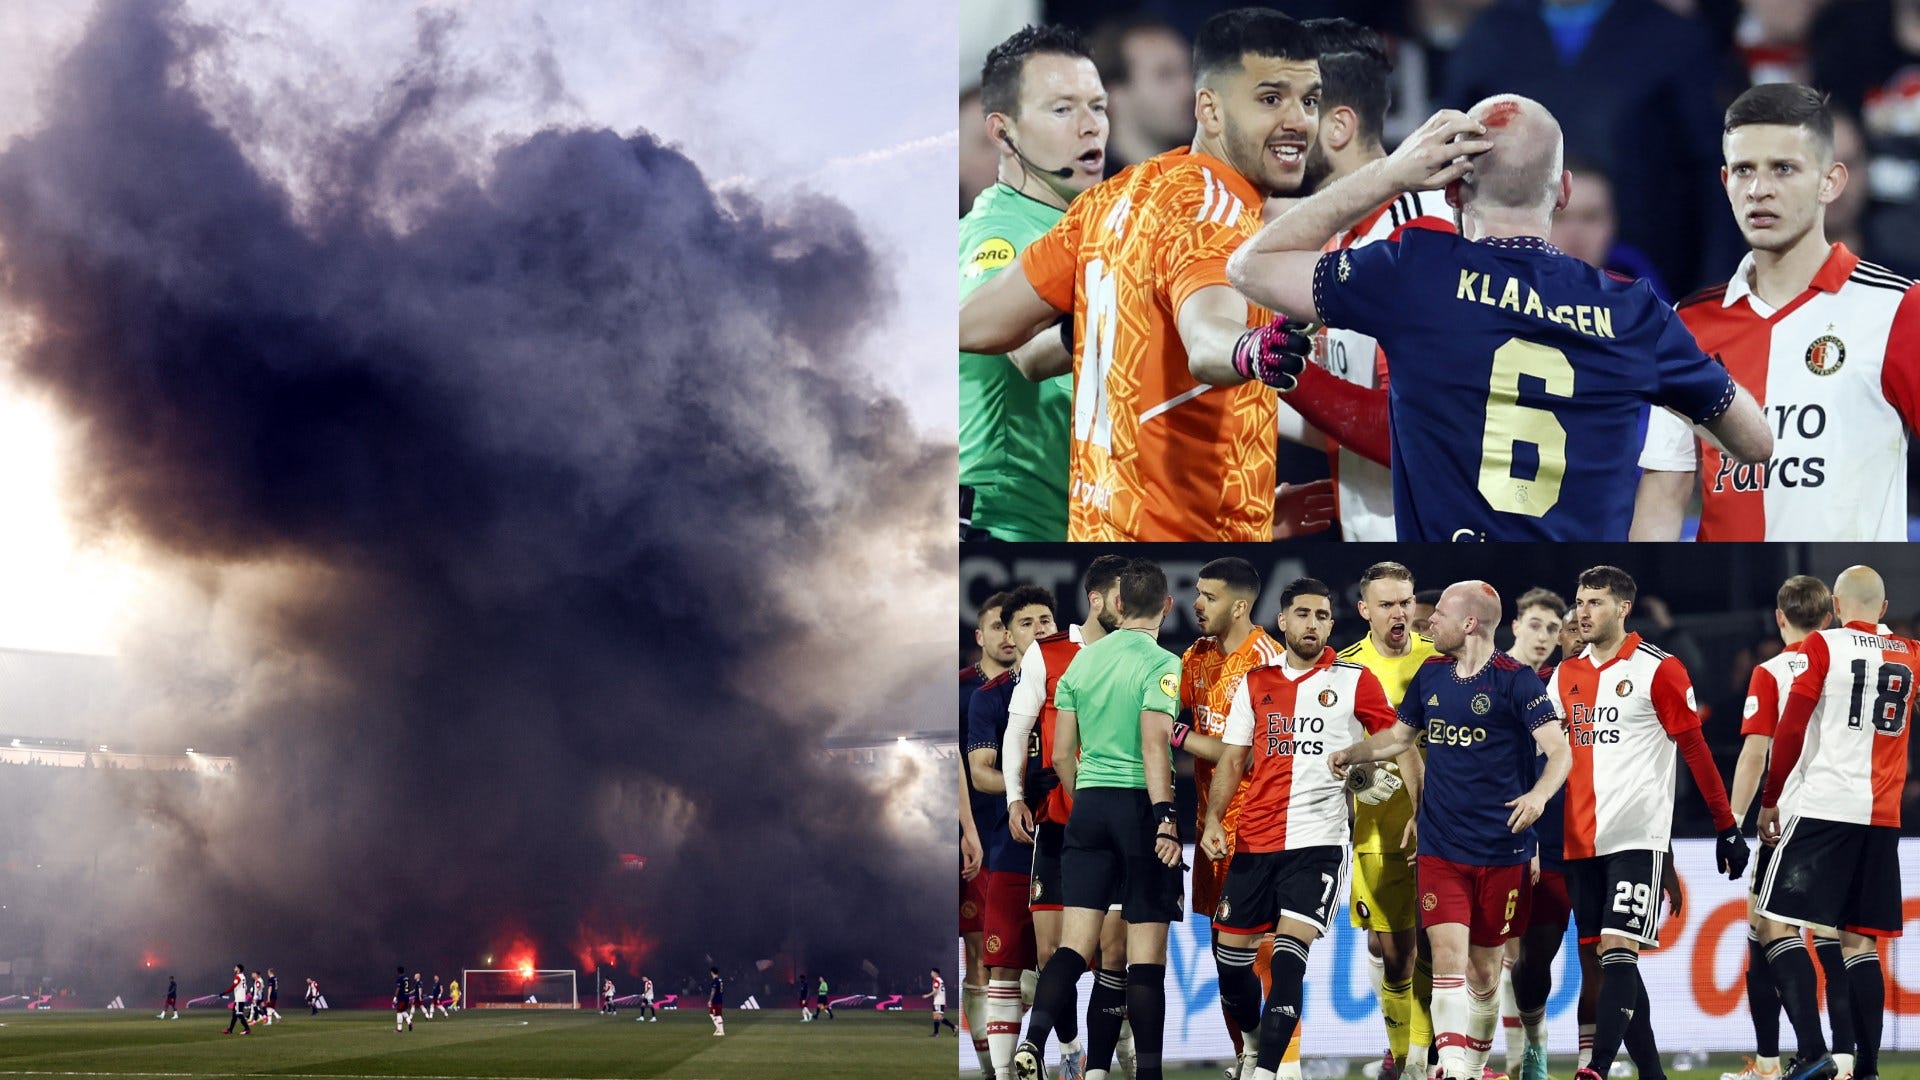 knvb-announces-stricter-rules-for-fans-after-outrageous-incident-in-which-ajax-s-davy-klaassen-bloodied-by-projectile-or-goal-com